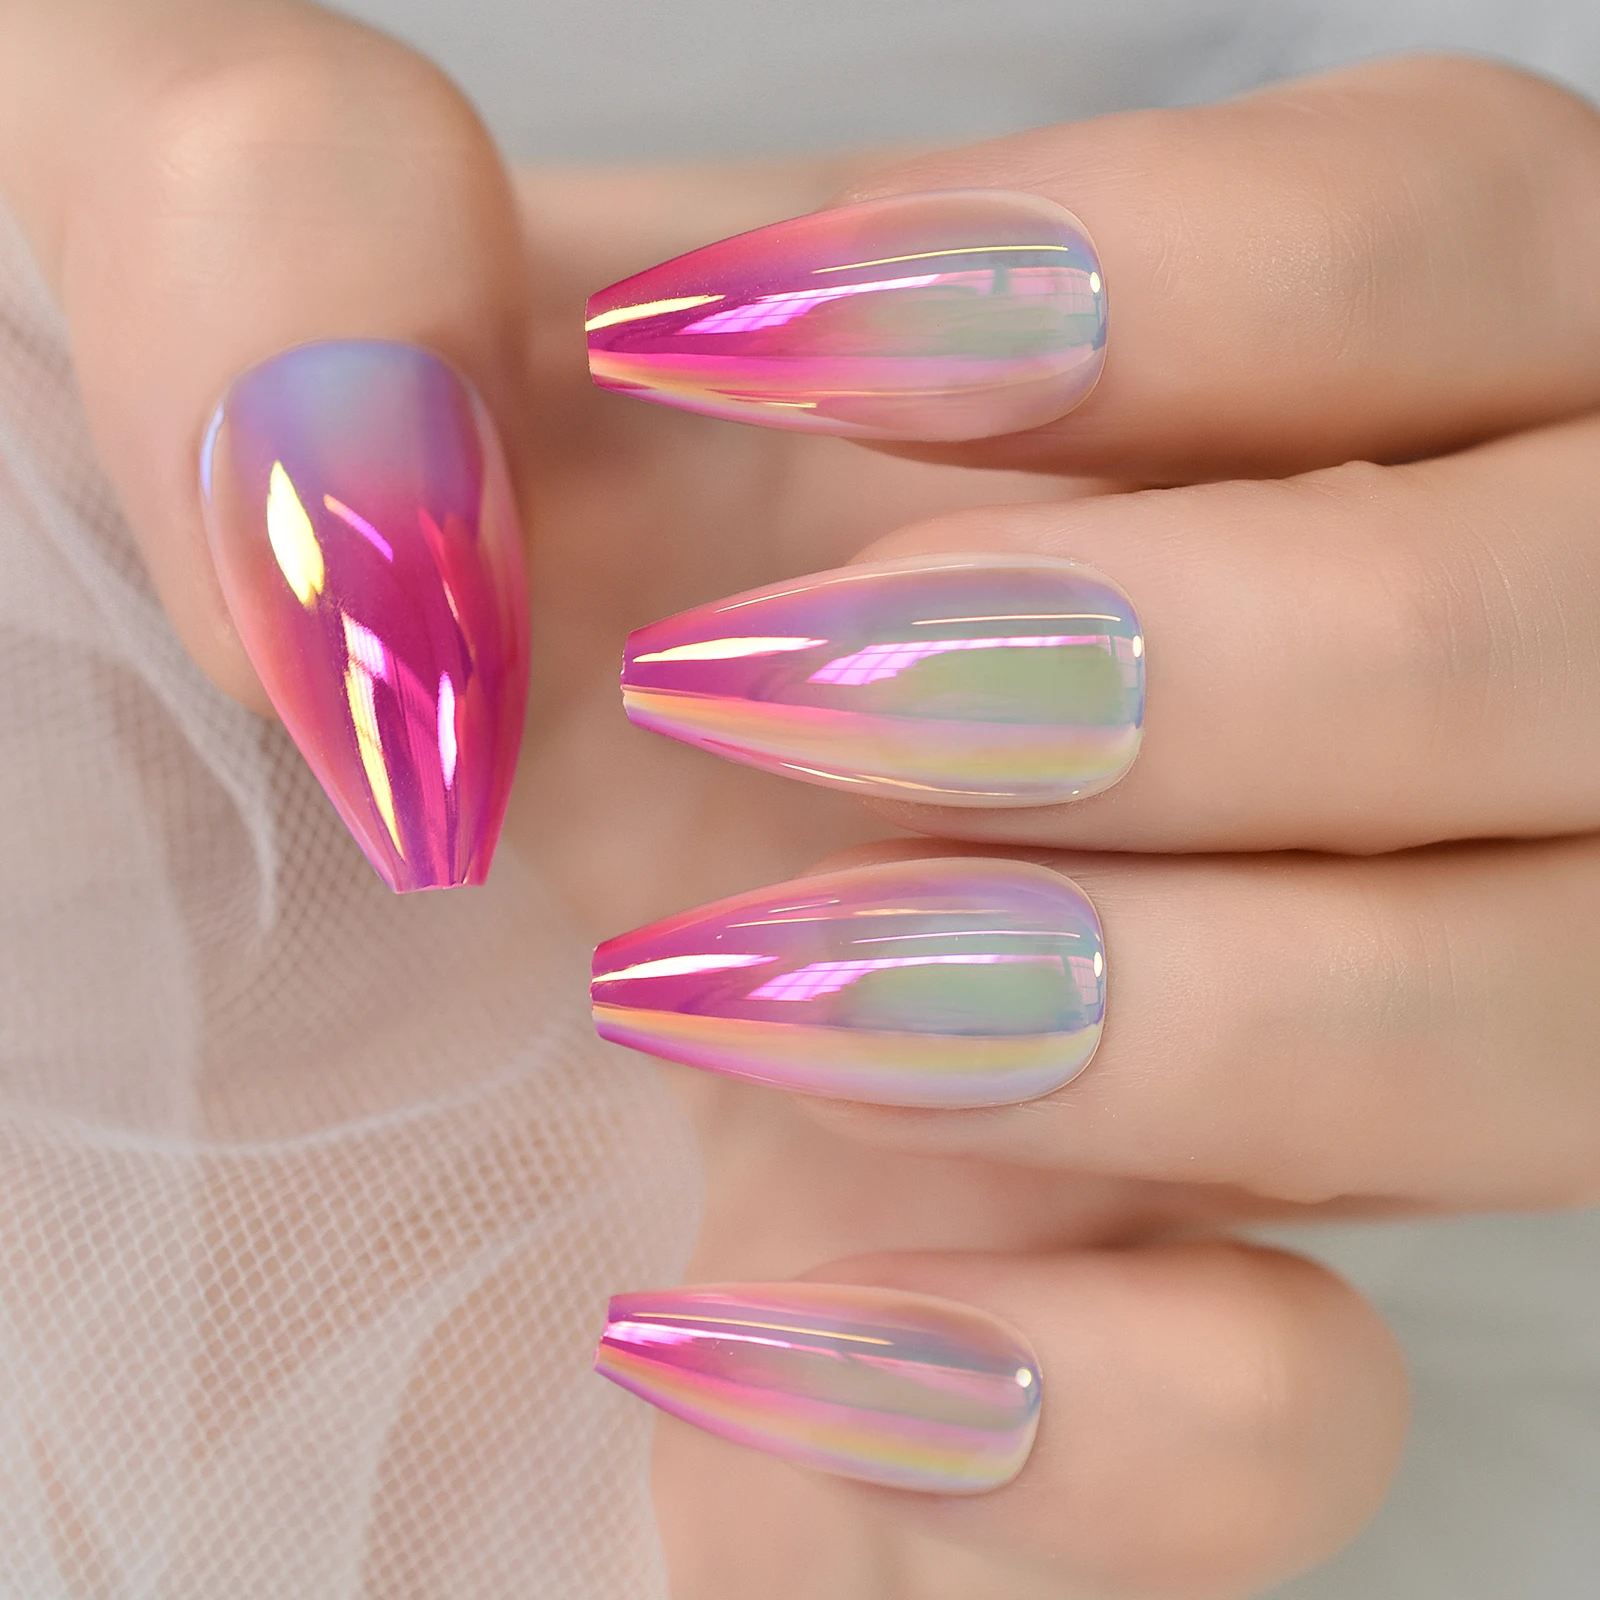 Metallic Ombre Nails Long Gorgeous Gradient Ballerina Fake Press On Nails  Super Bright Manicure Mirror Designed Tips - False Nails - AliExpress